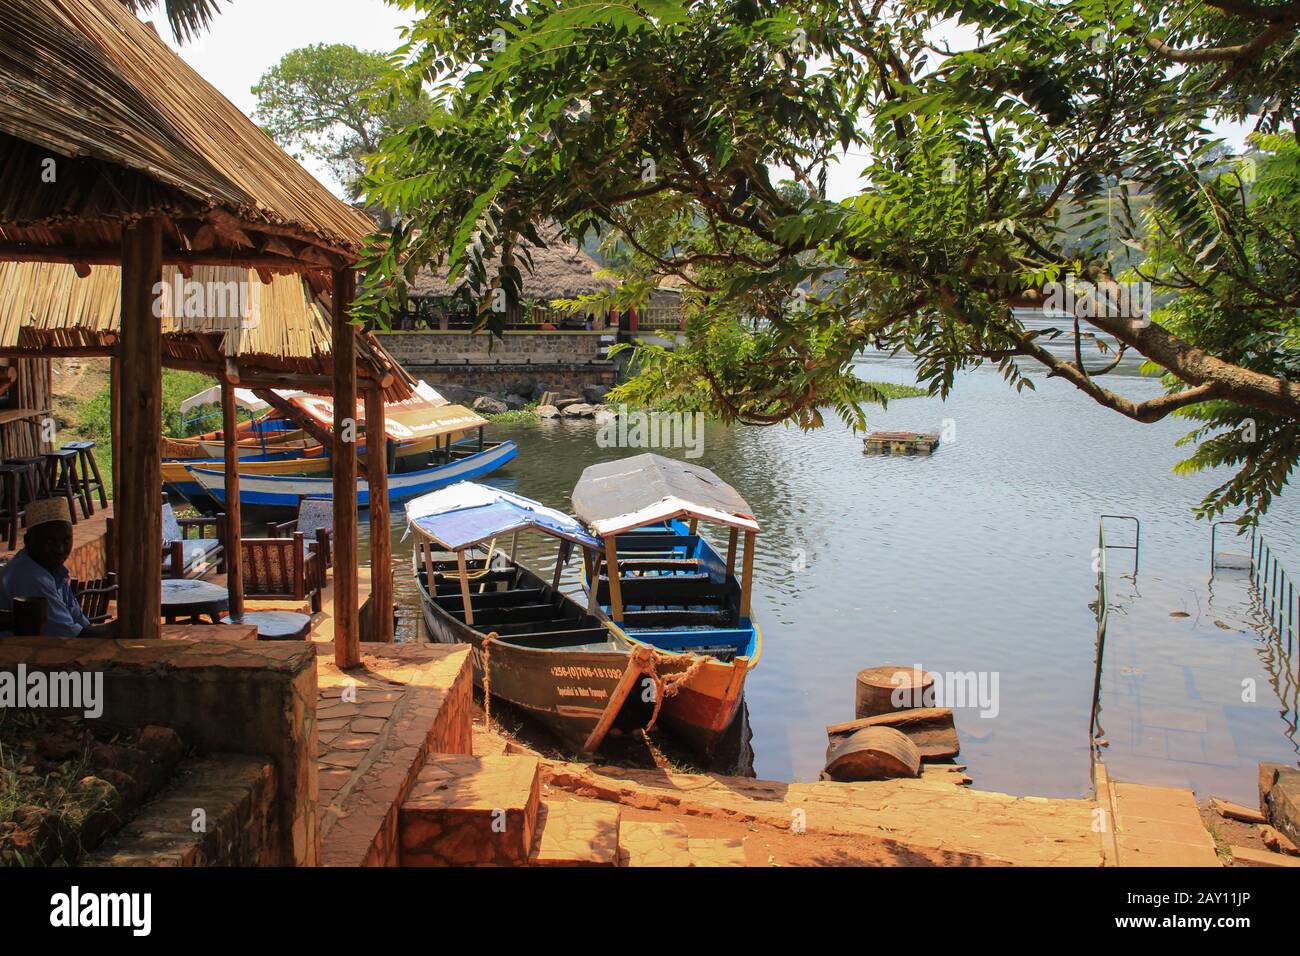 Jinja, Uganda - January 20, 2015: Restaurants and cafes with boats near the source of the Nile River. Stock Photo